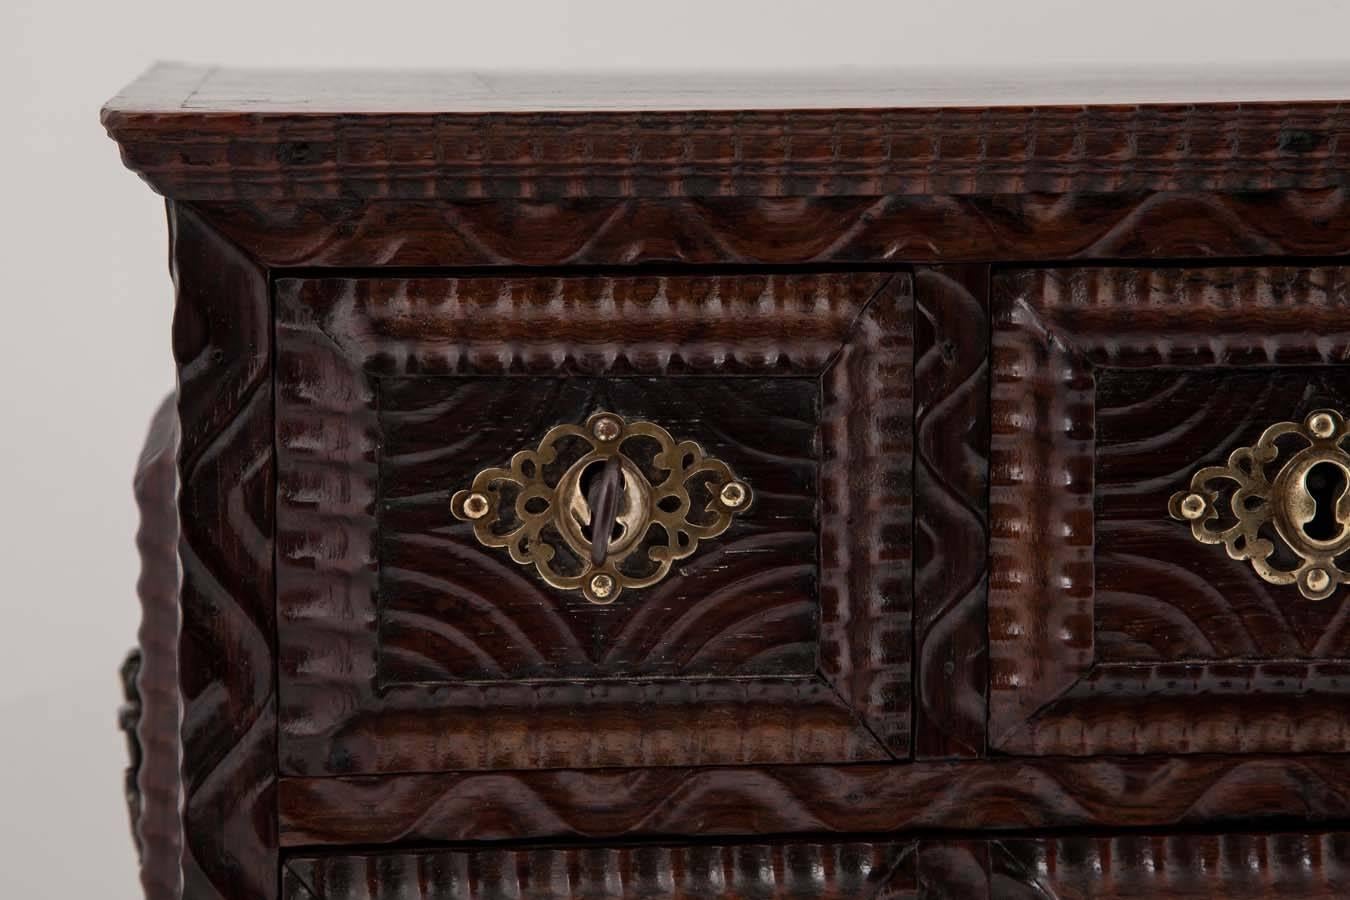 This historic city on the East Coast of India is known for its fine and decorative furniture. Pieces made for the home market rather than for export, incorporate every part of the rosewood tree. This includes the sapwood which is used for drawer